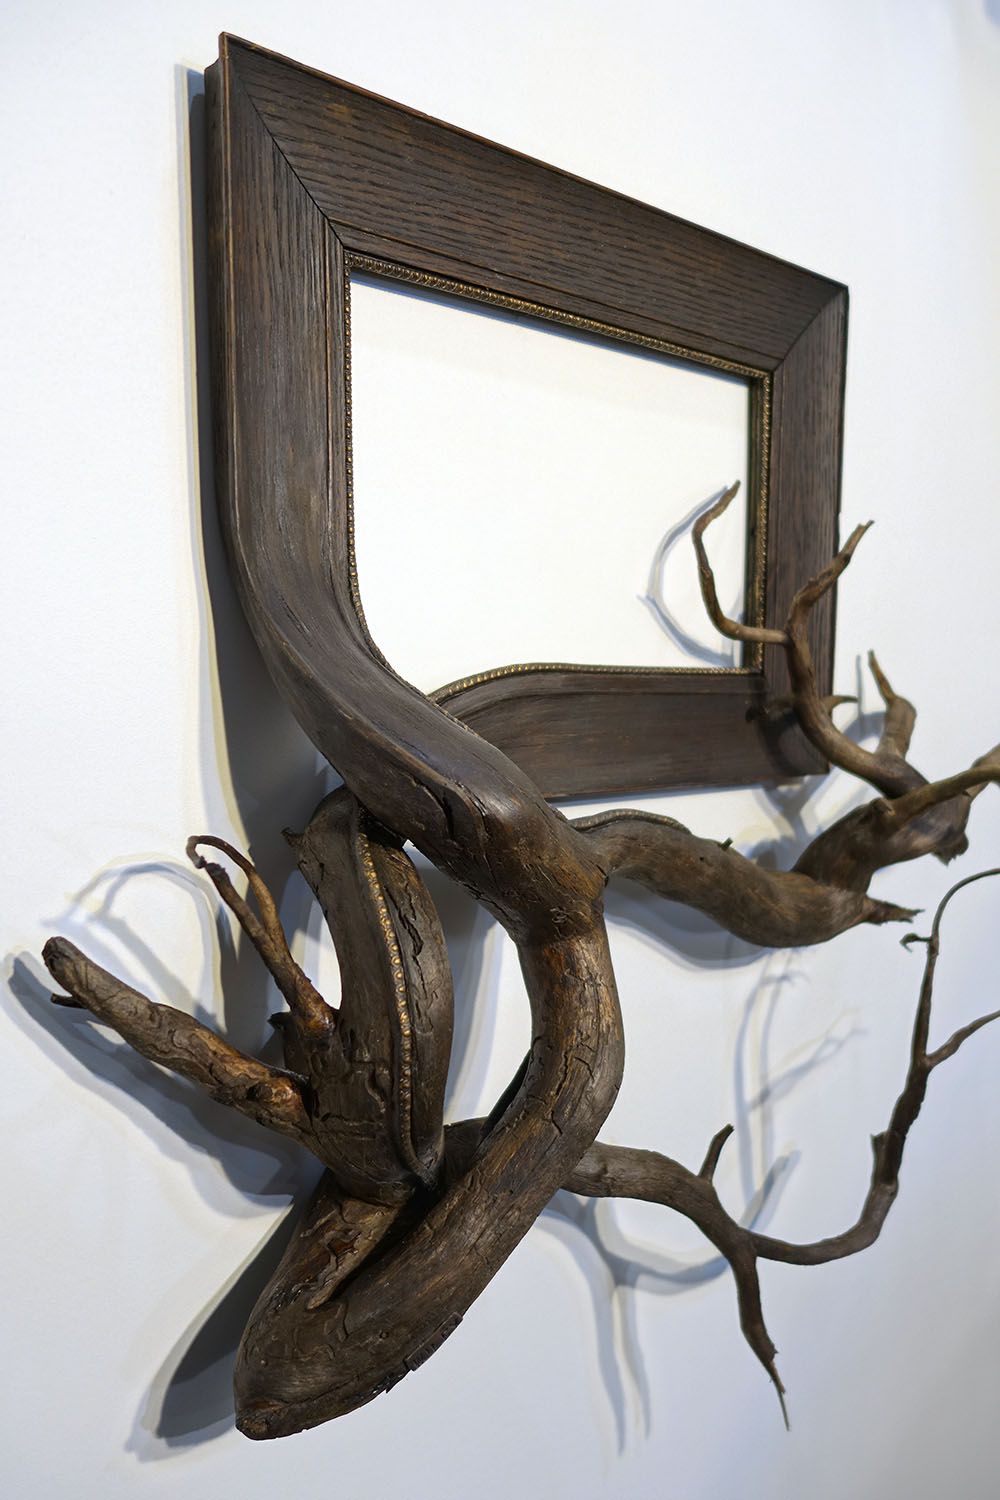 Tree Roots And Branches Fused With Ornate Picture Frames By Darryl Cox 16